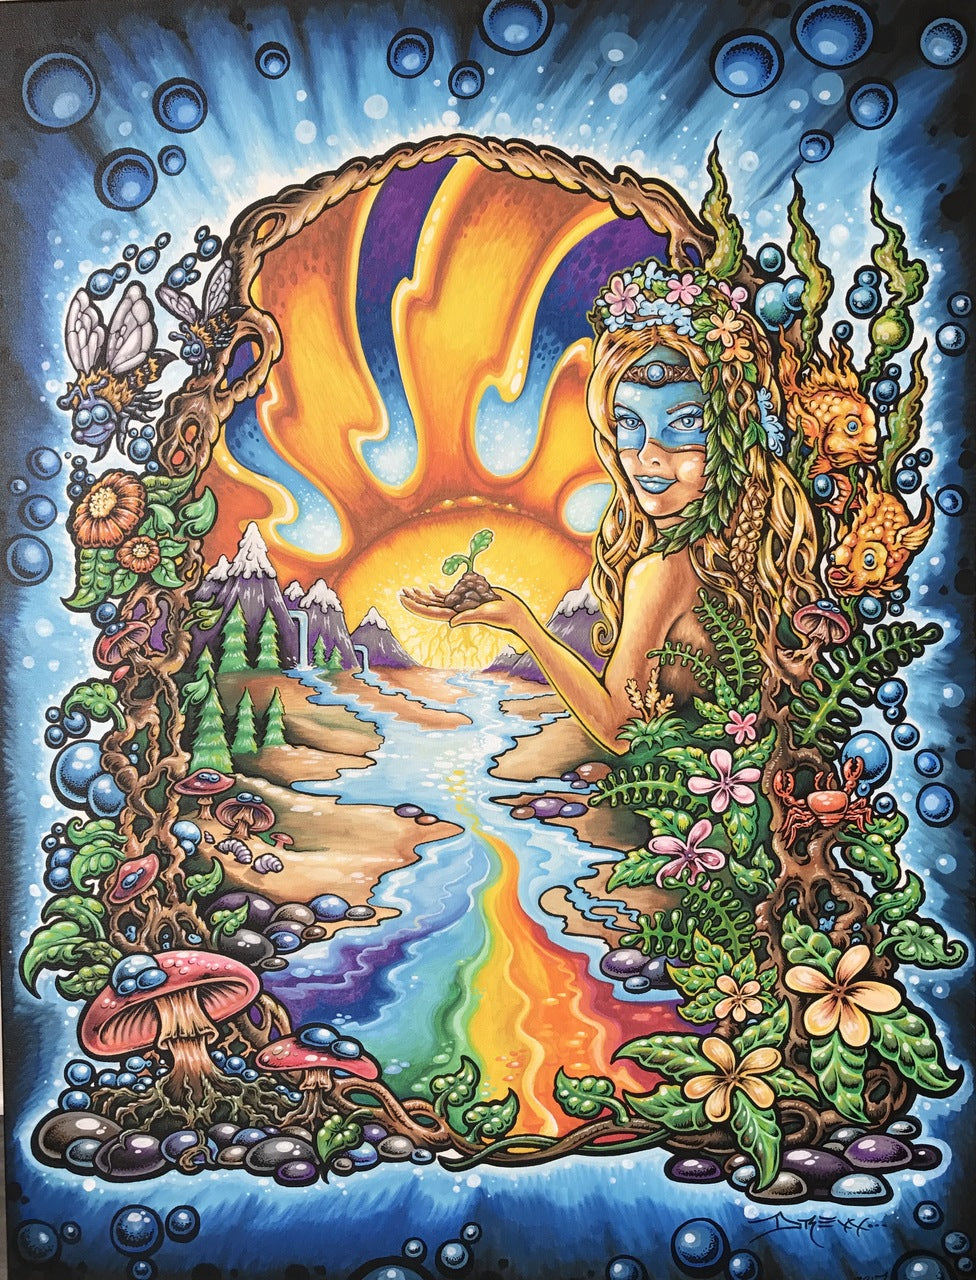 SOLD!  A MOTHER EARTH GODDESS 40" x 30" Original painting on Canvas by Drew Brophy